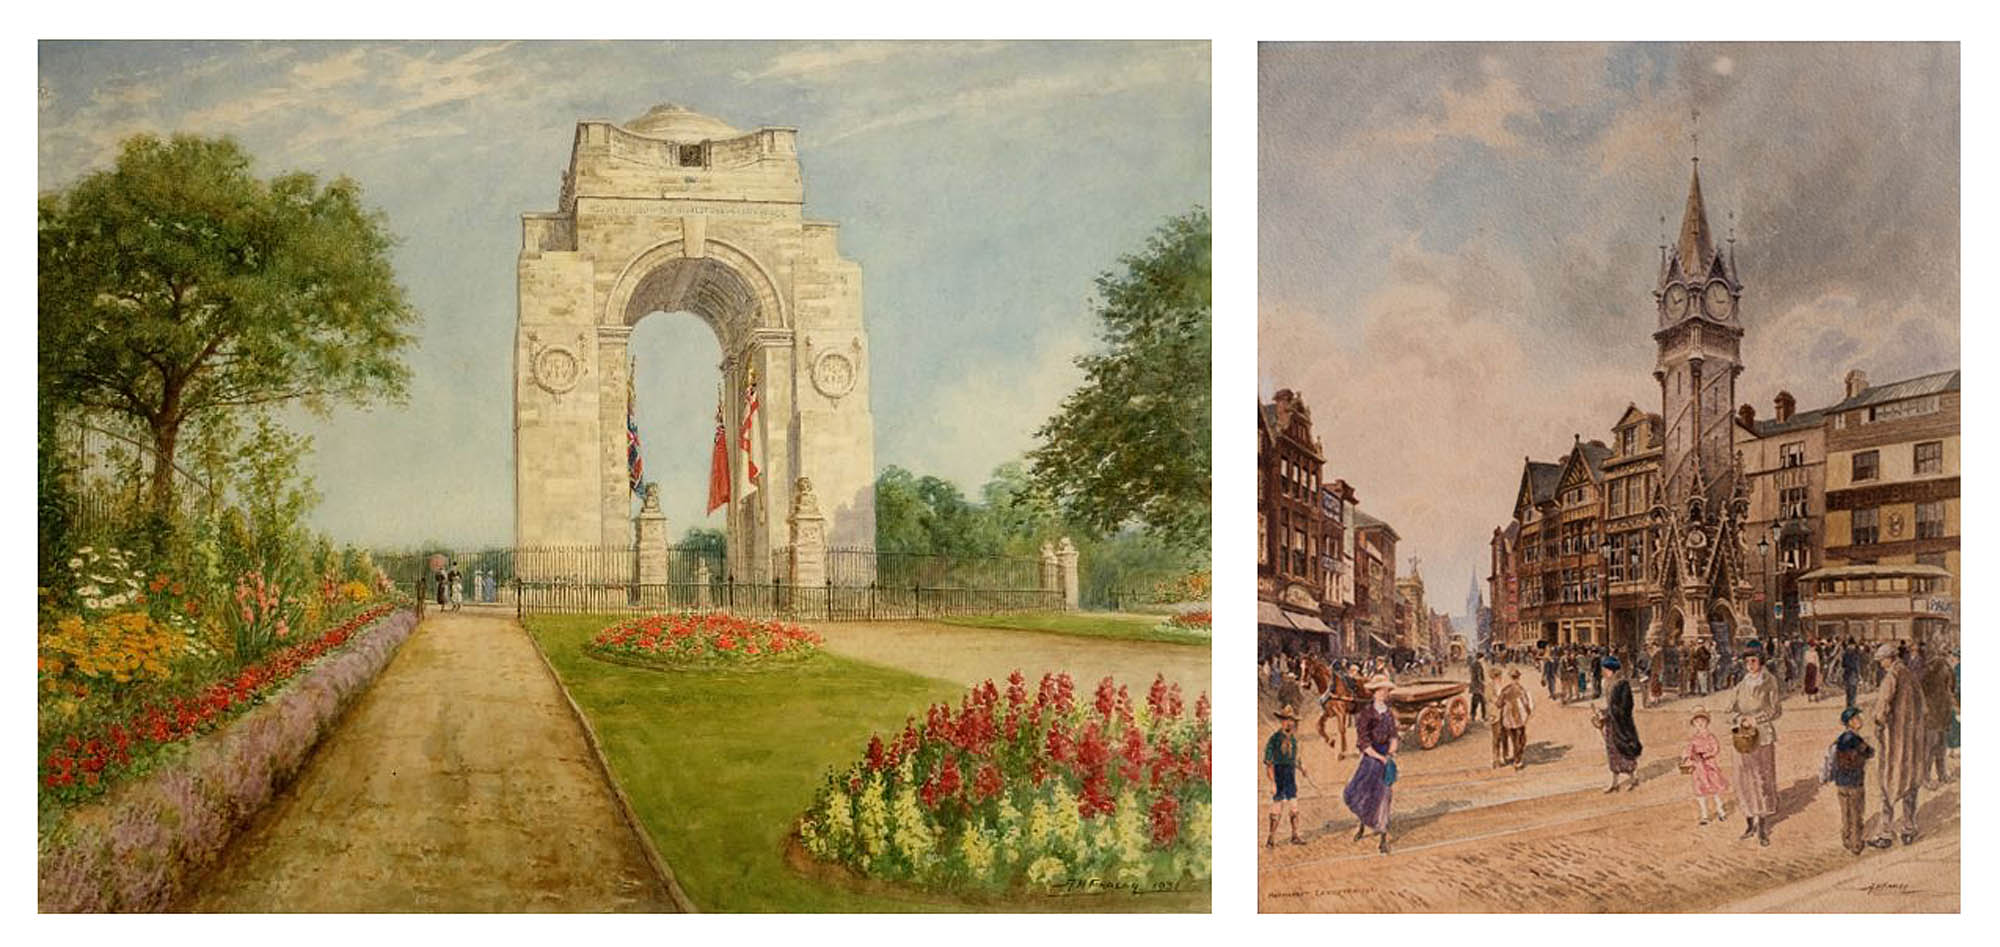 'The War Memorial, Leicester' and 'The Clock Tower' are both part of Leicester's collections.